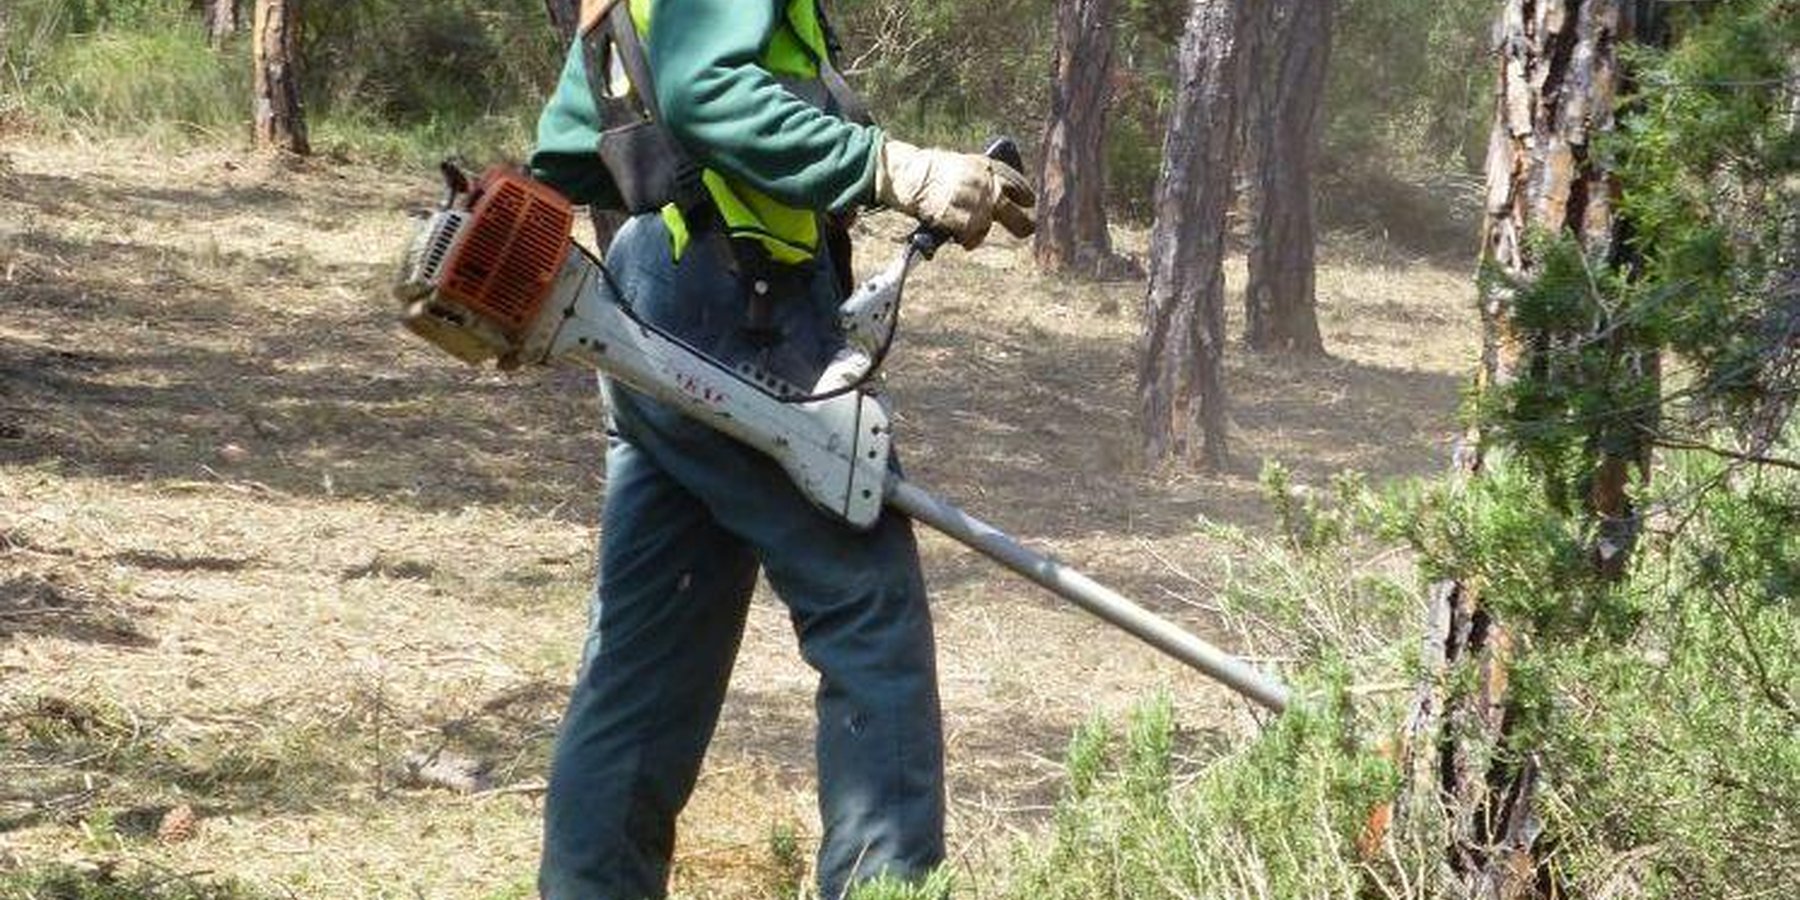 Forest management provides jobs - many forest workers were unemployed 